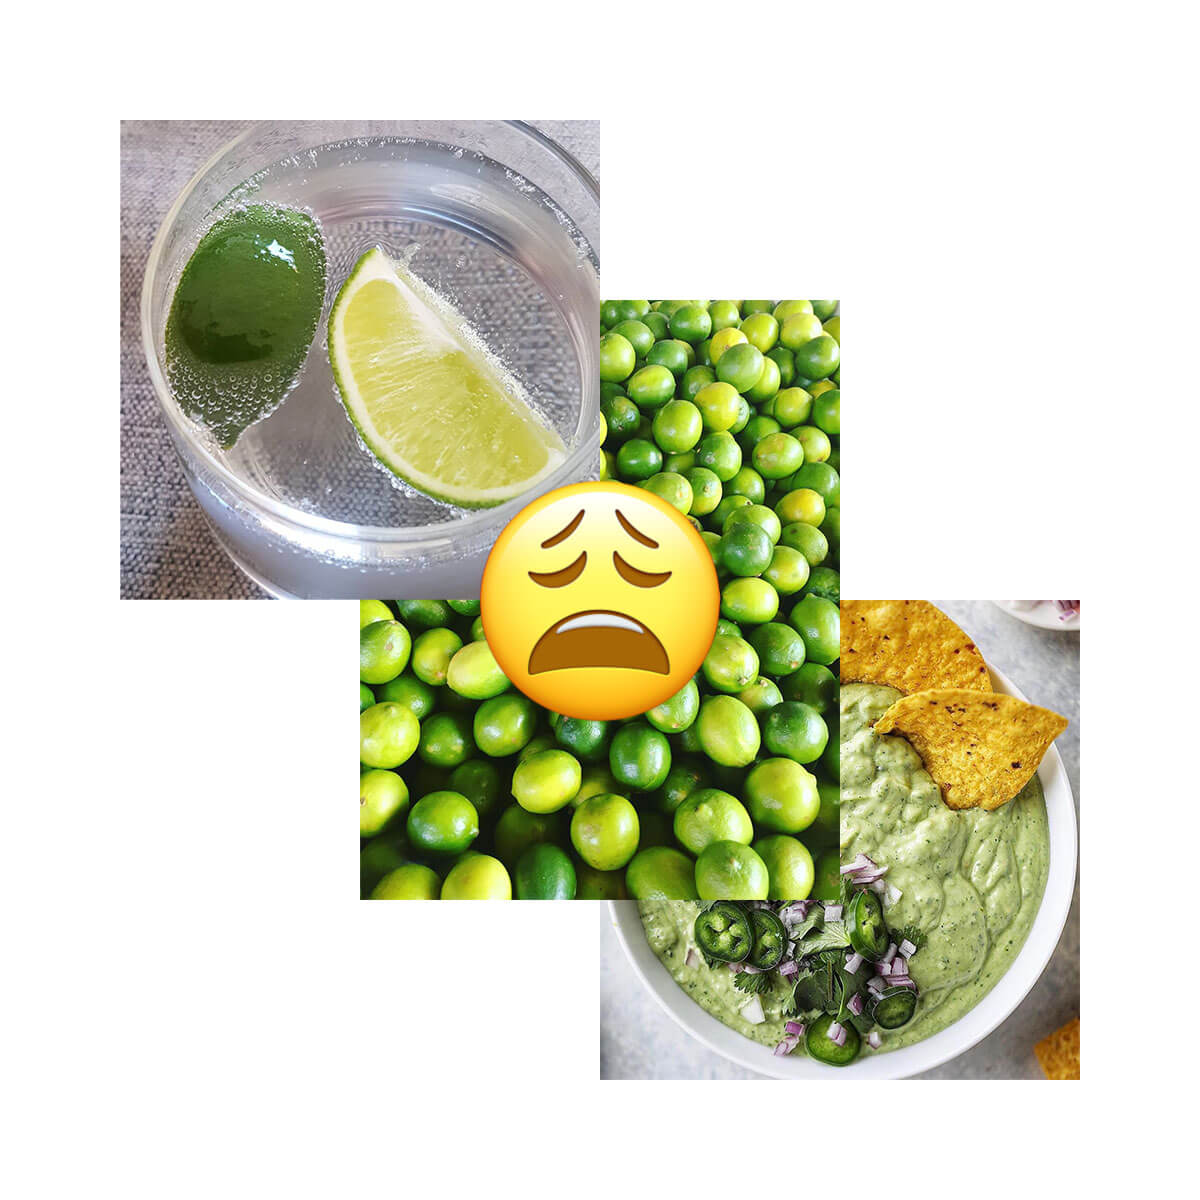 Why is there no lime emoji?